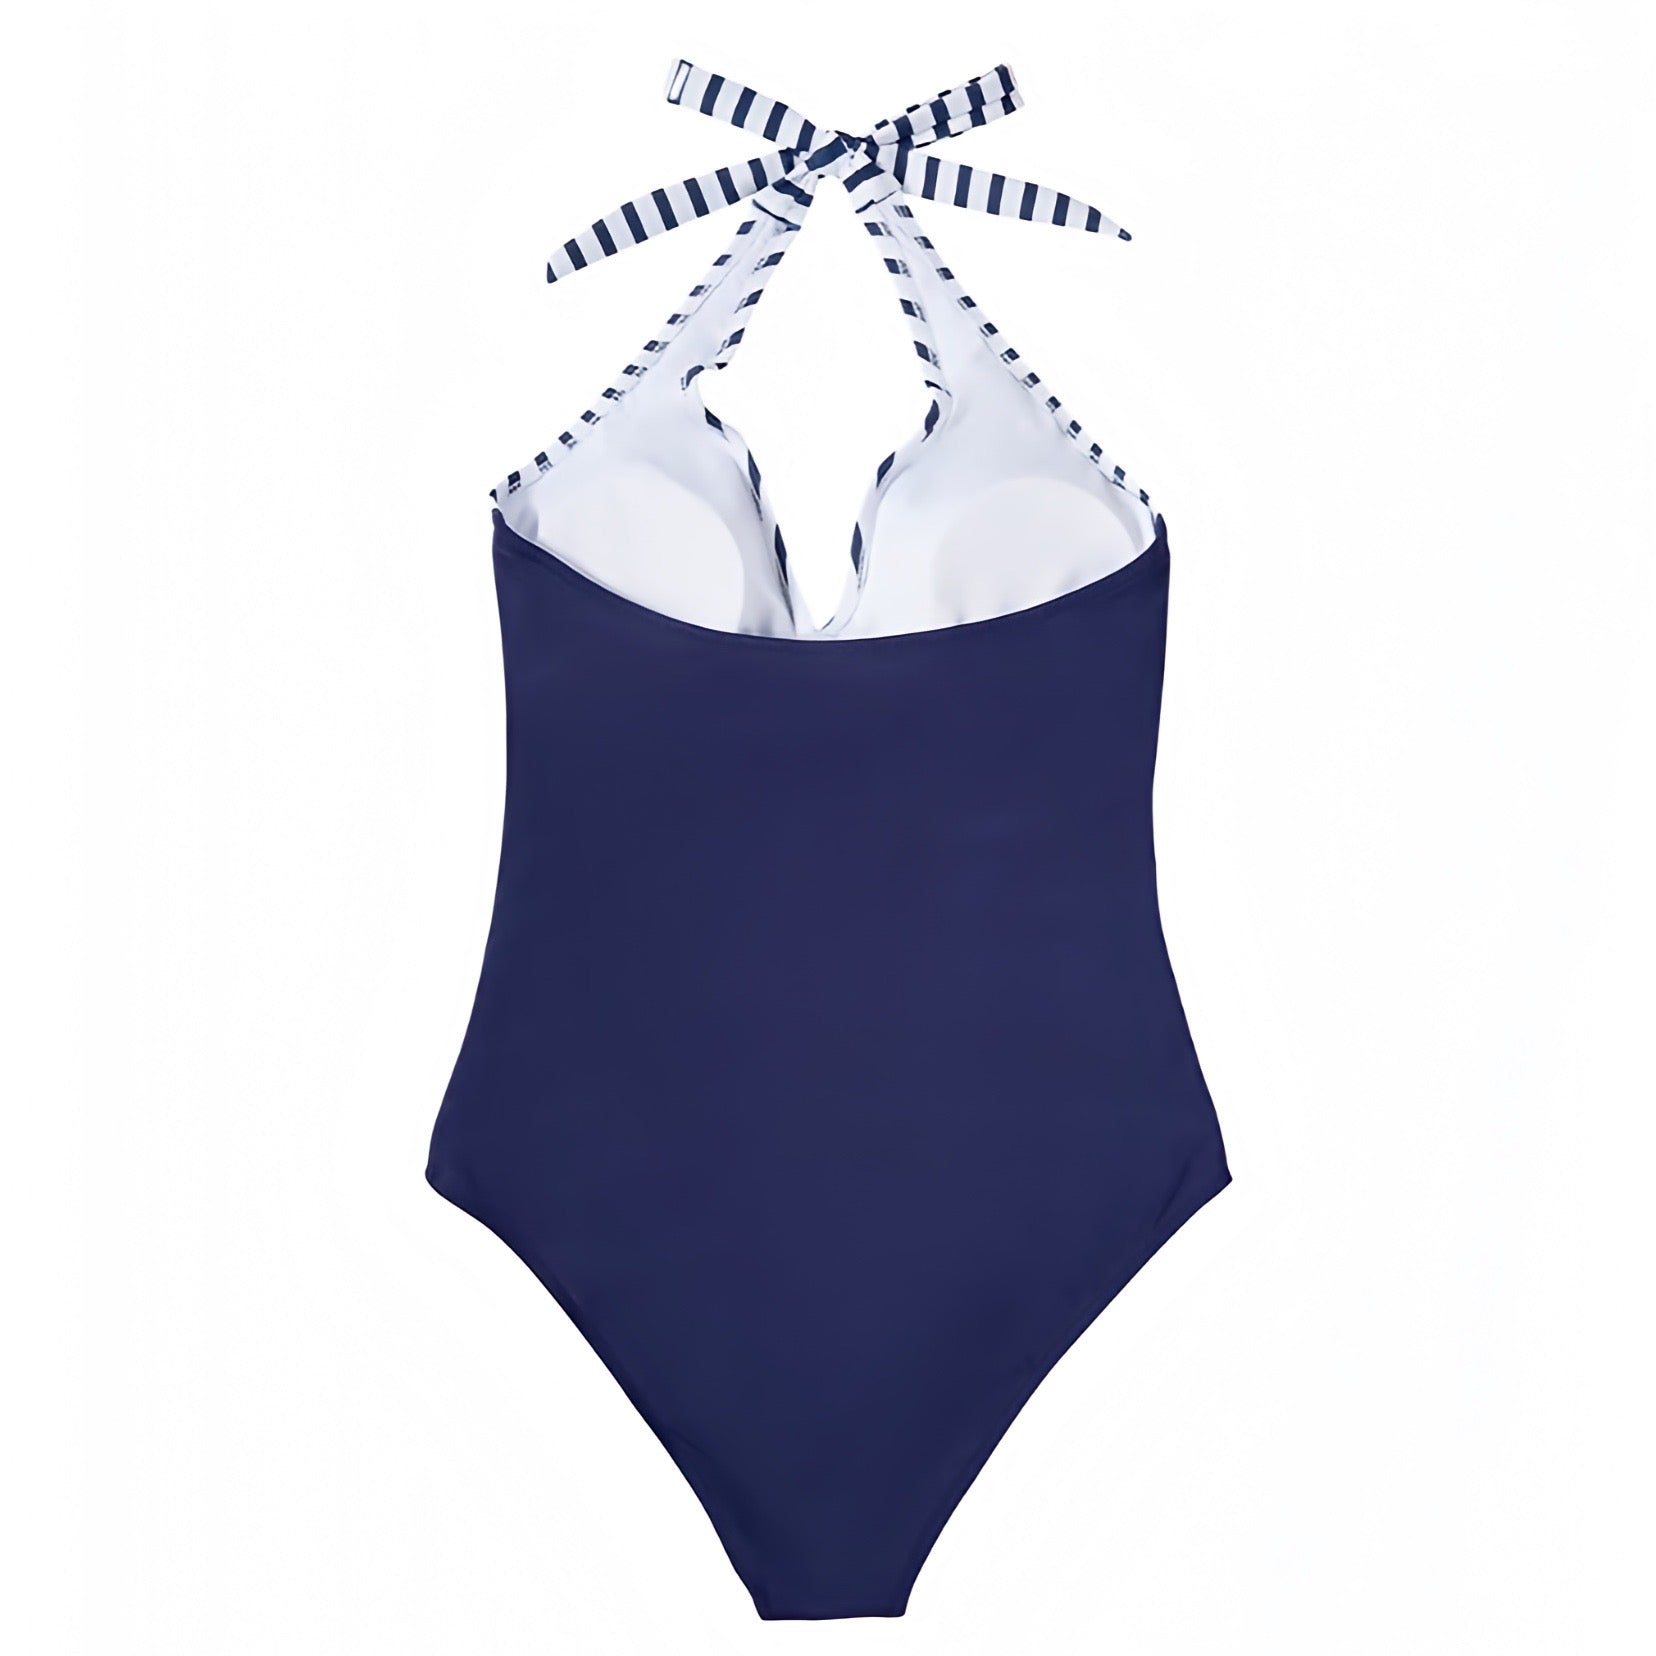 navy-blue-and-white-striped-seersucker-pinstriped-solid-patterned-slim-fit-bodycon-cut-out-v-neck-spaghetti-strap-sleeveless-backless-open-back-halter-wireless-push-up-cheeky-thong-modest-one-piece-swimsuit-swimwear-bathing-suit-women-ladies-teens-tweens-chic-trendy-spring-2024-summer-elegant-classic-feminine-classy-preppy-style-european-greece-vacation-coastal-granddaughter-grandmillennial-mamma-mia-beach-wear-revolve-minow-frankies-bikinis-blackbough-kulakinis-dupe